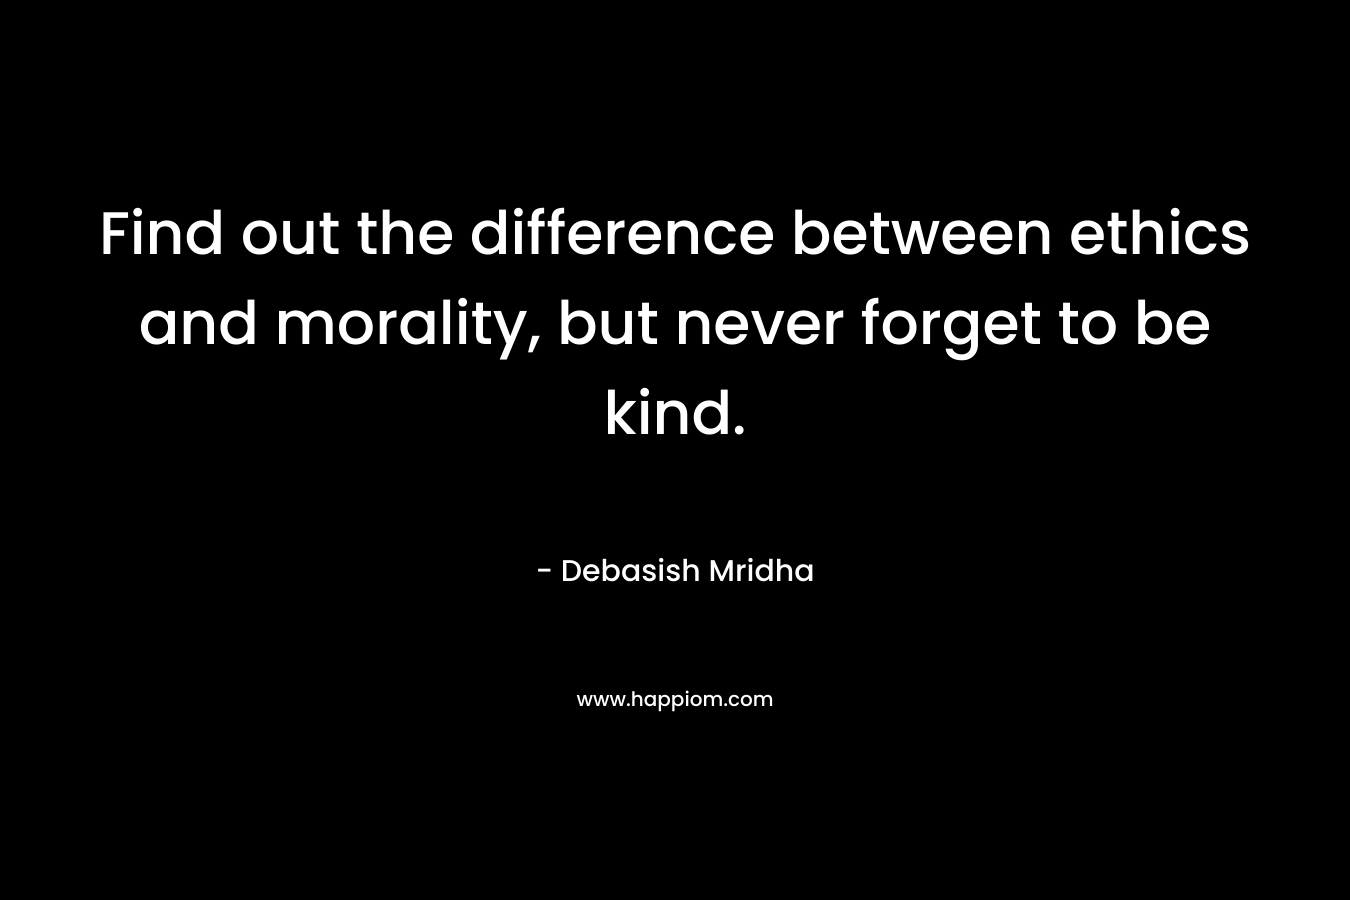 Find out the difference between ethics and morality, but never forget to be kind.